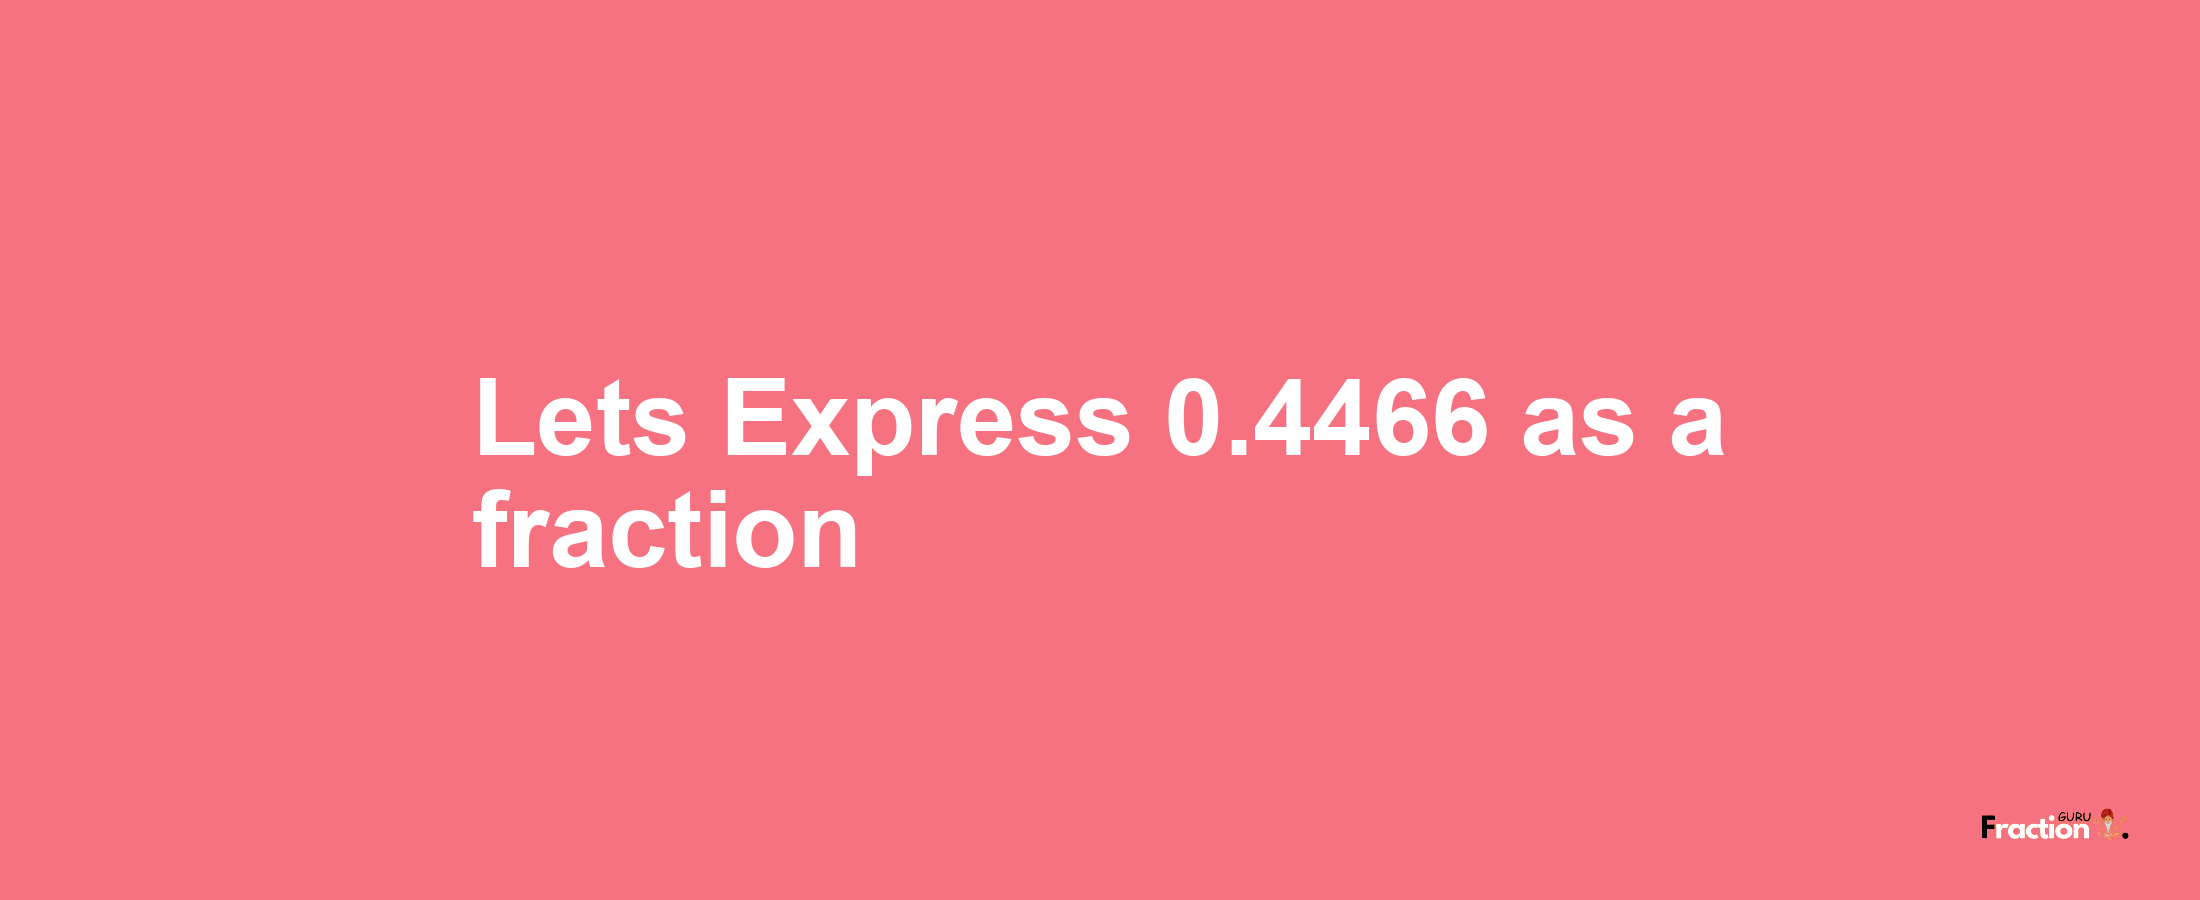 Lets Express 0.4466 as afraction